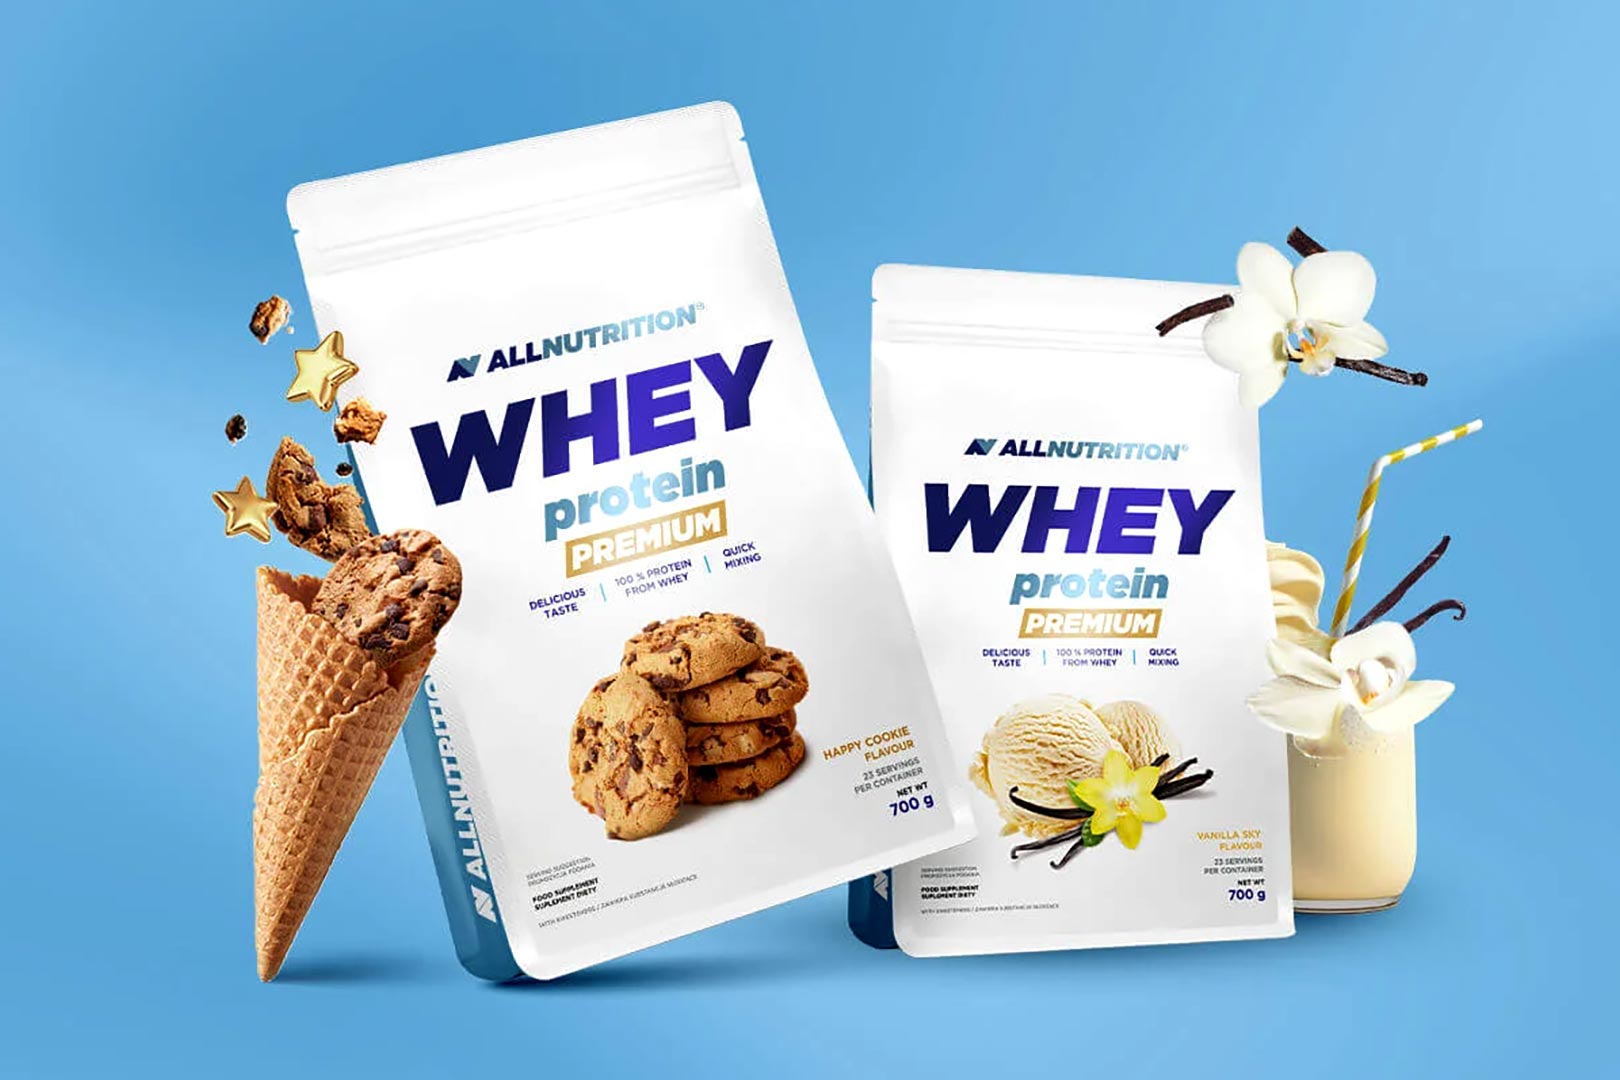 All Nutrition Whey Protein Premium